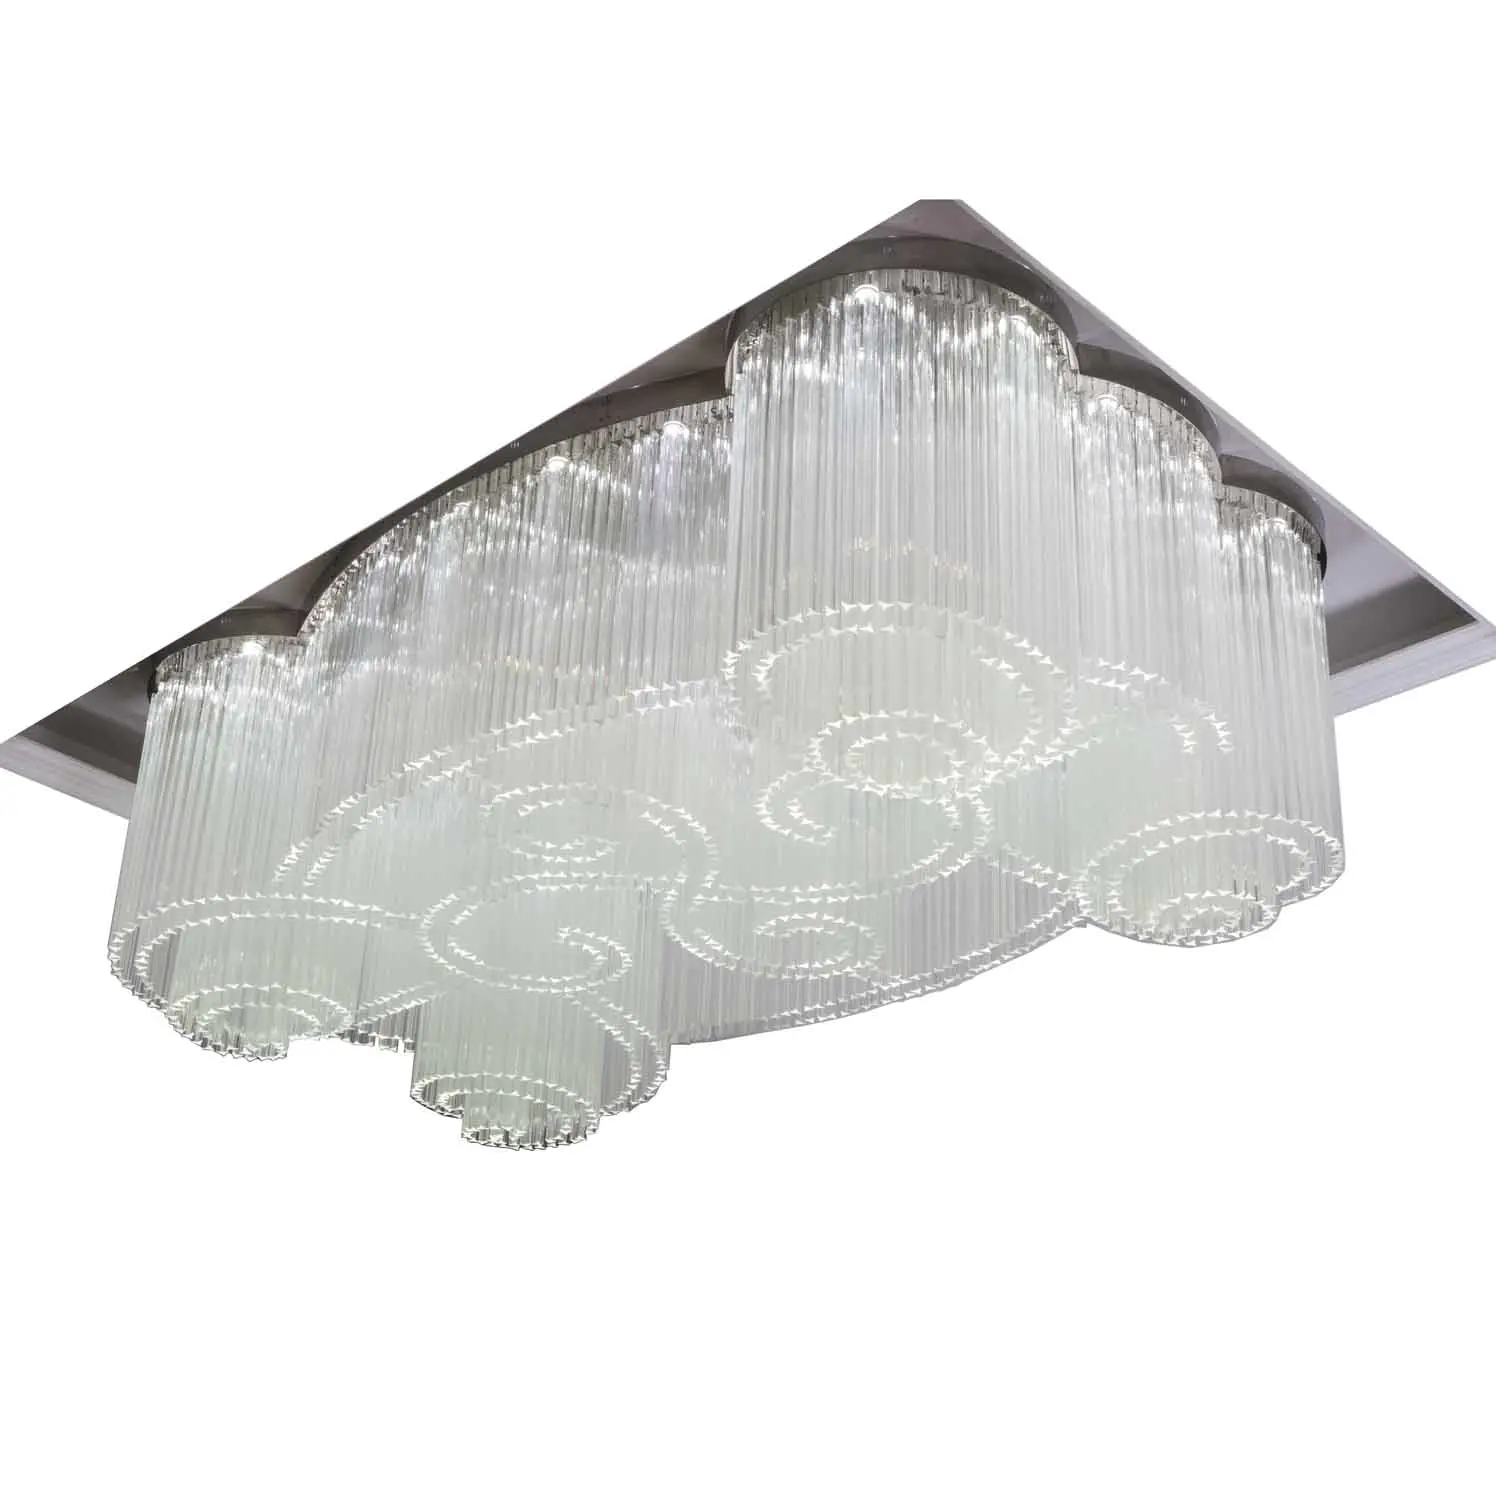 Large Contemporary Crystal Chandeliers (MX217-DX6613)